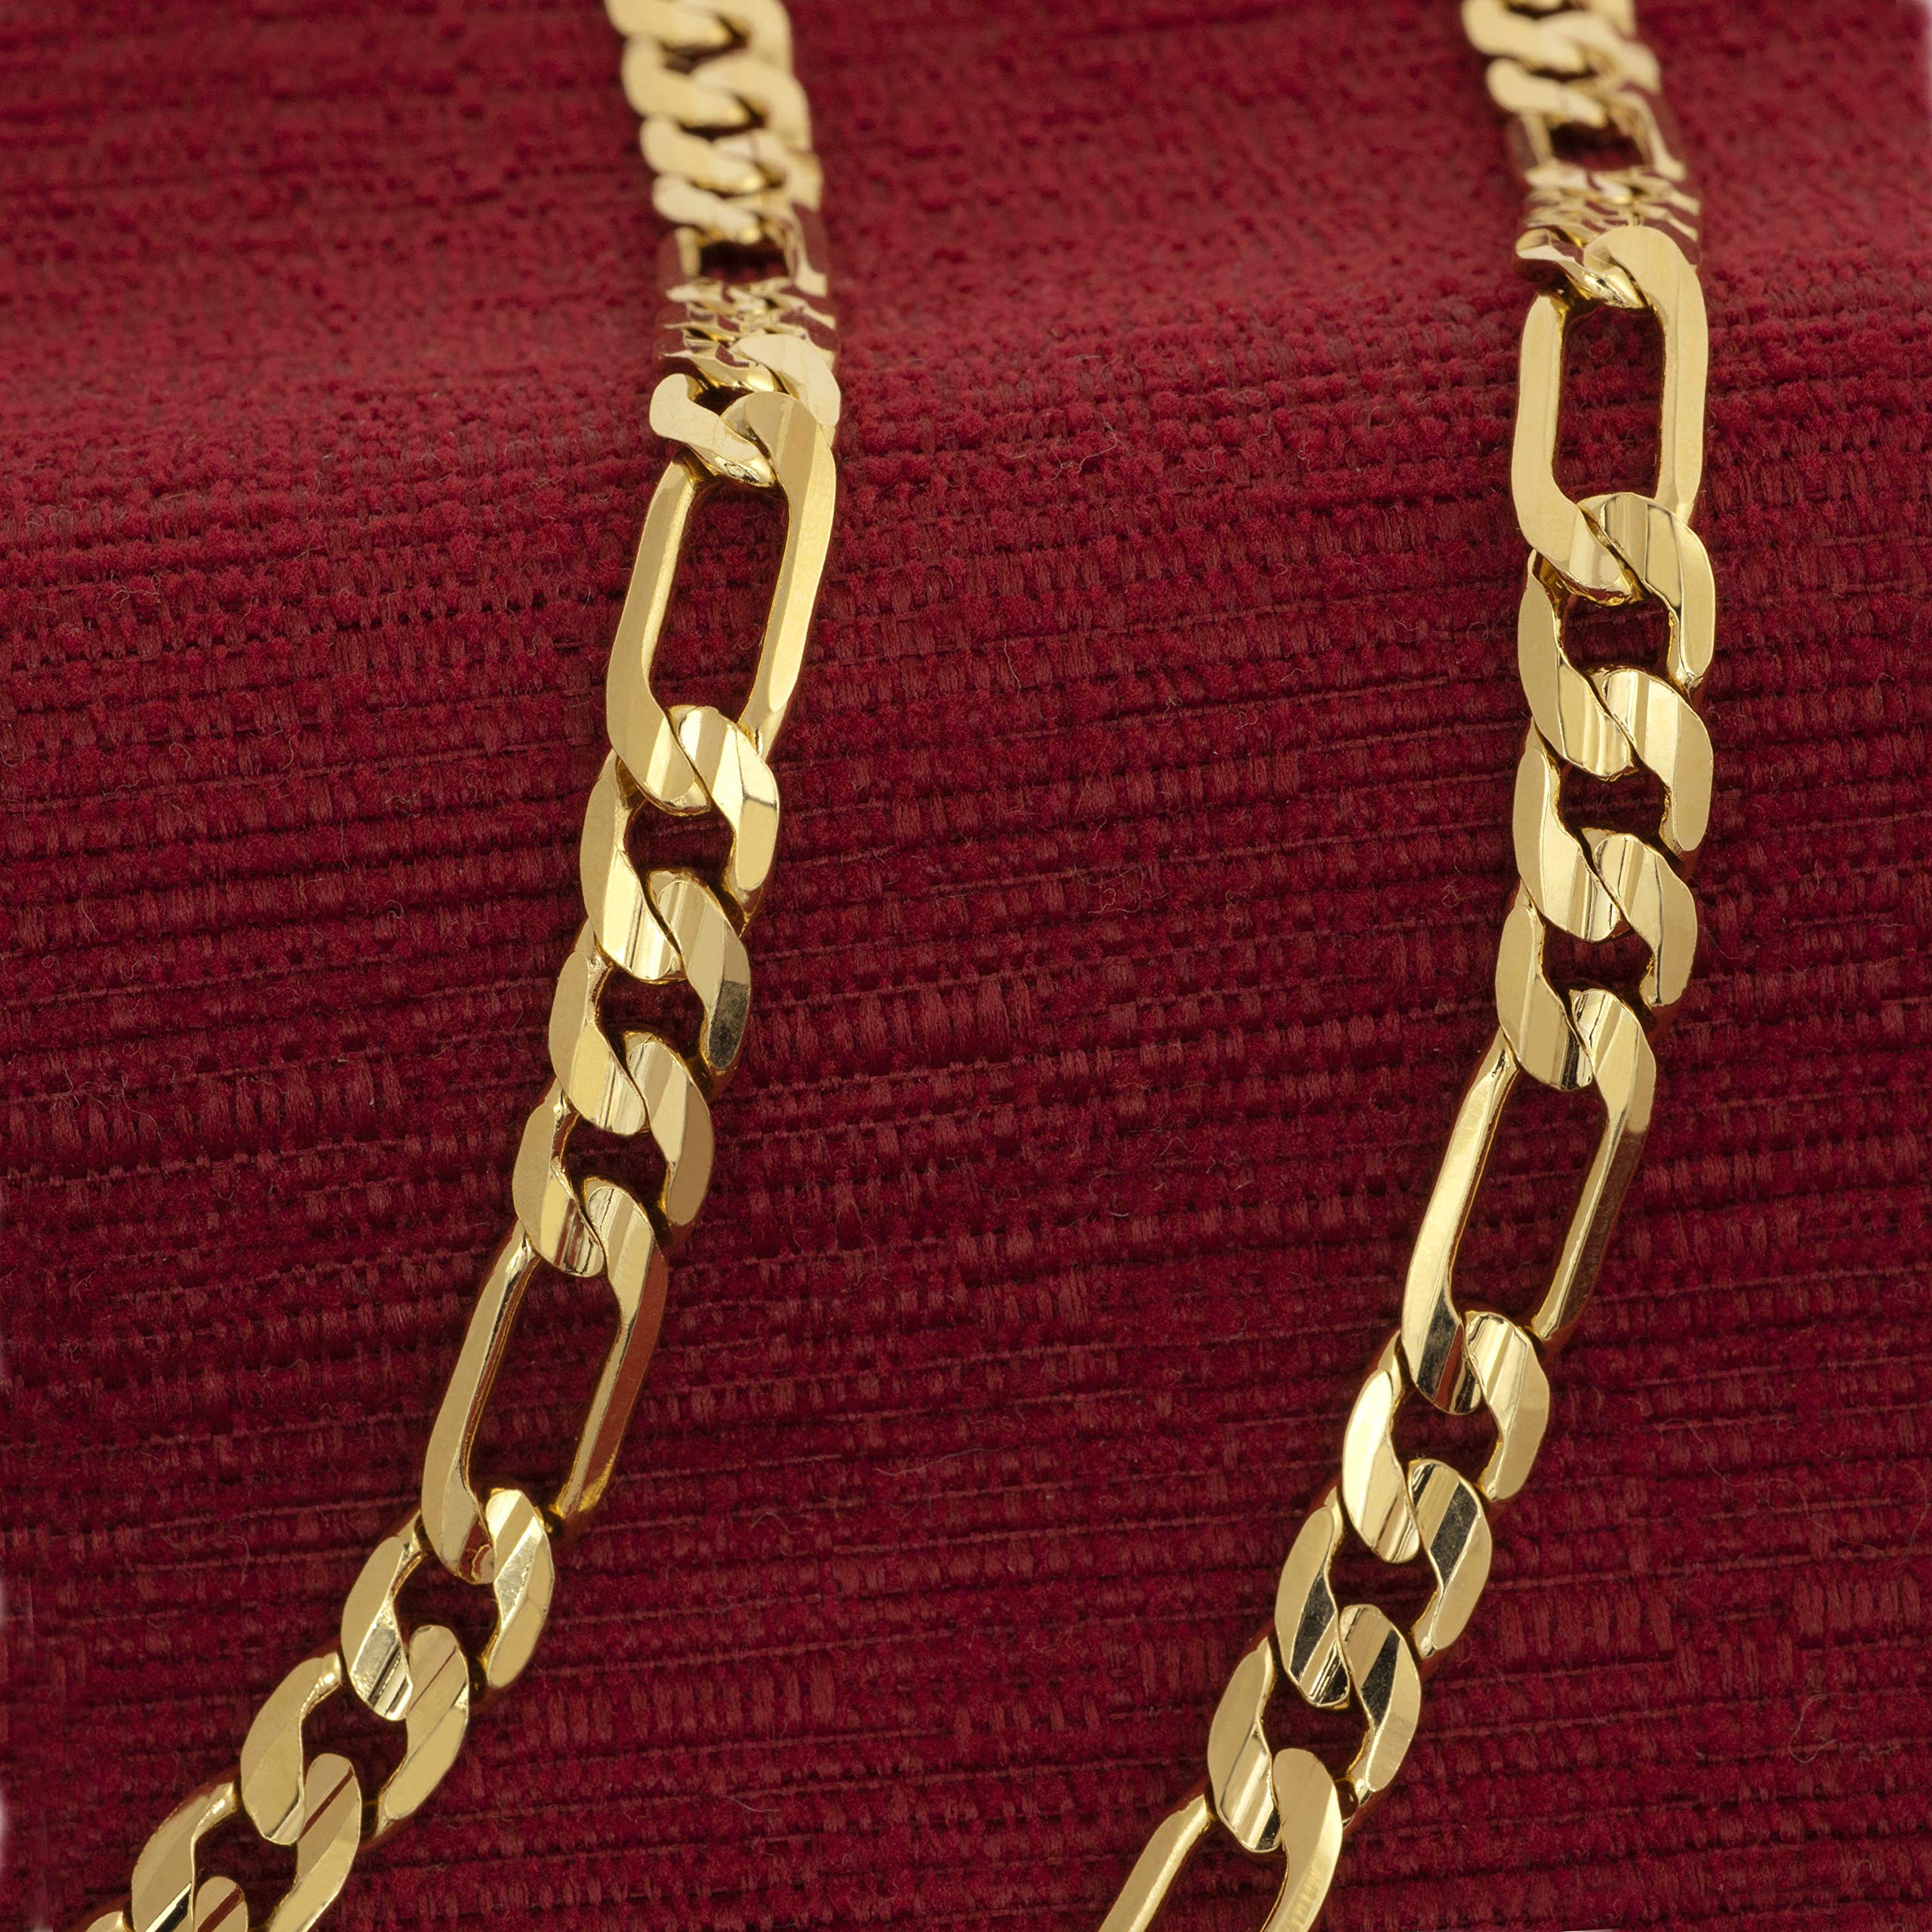 LIFETIME JEWELRY 7mm Figaro Chain Necklace Diamond Cut 24k Real Gold Plated